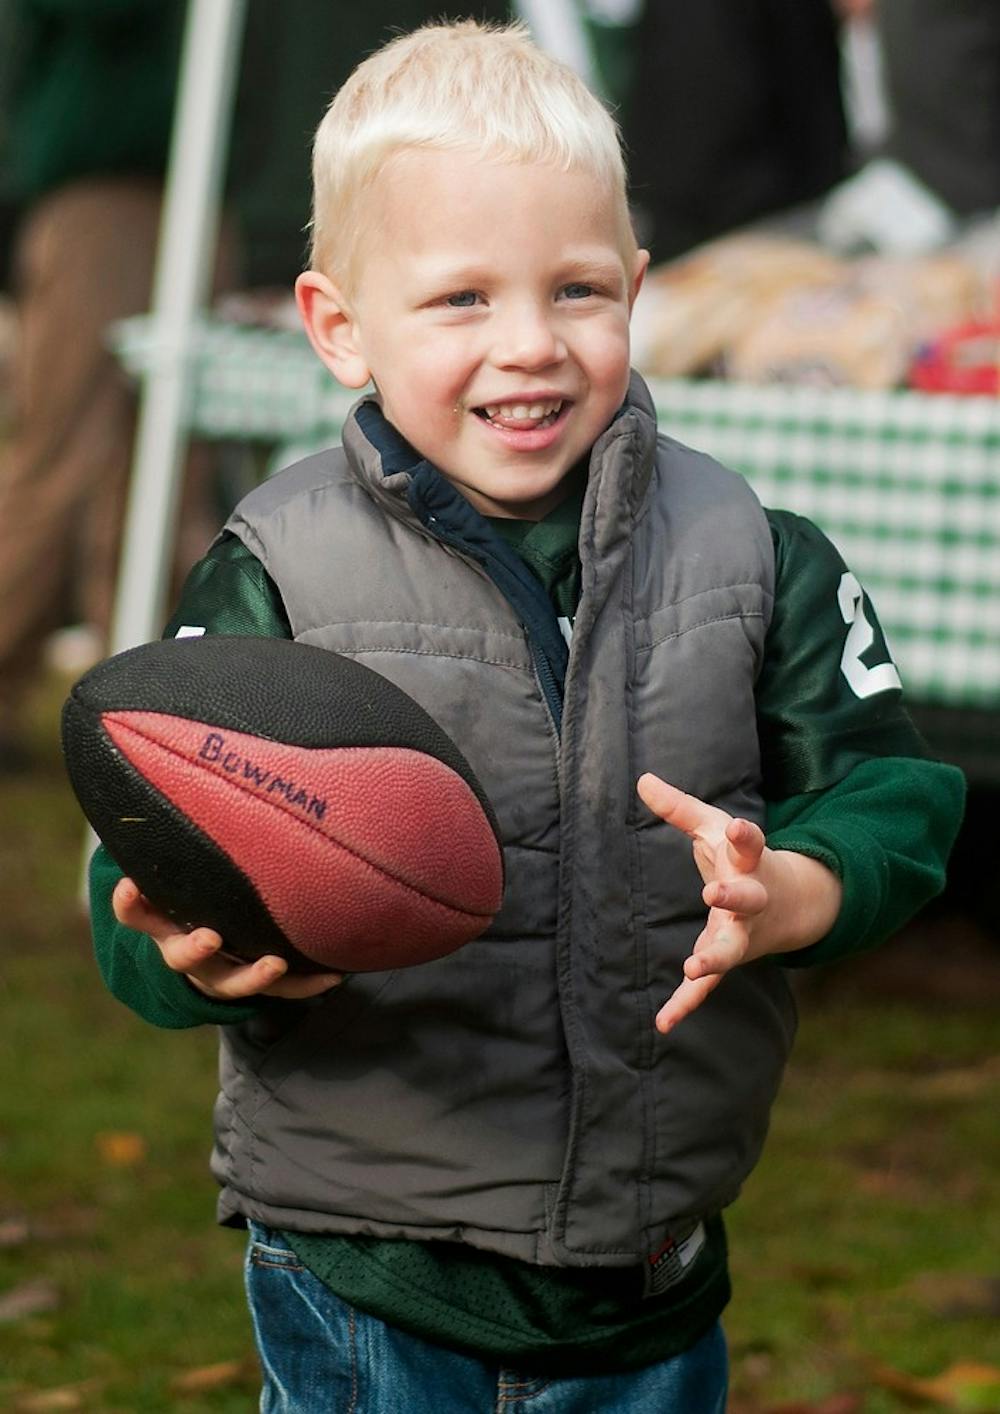 	<p>Howell, Mich., resident Tate Bowman, 3, plays with a football on Nov. 2, 2013, near Auditorium Road. Thousands of fans tailgated across campus before the game against Michigan. Georgina De Moya/ The State News</p>